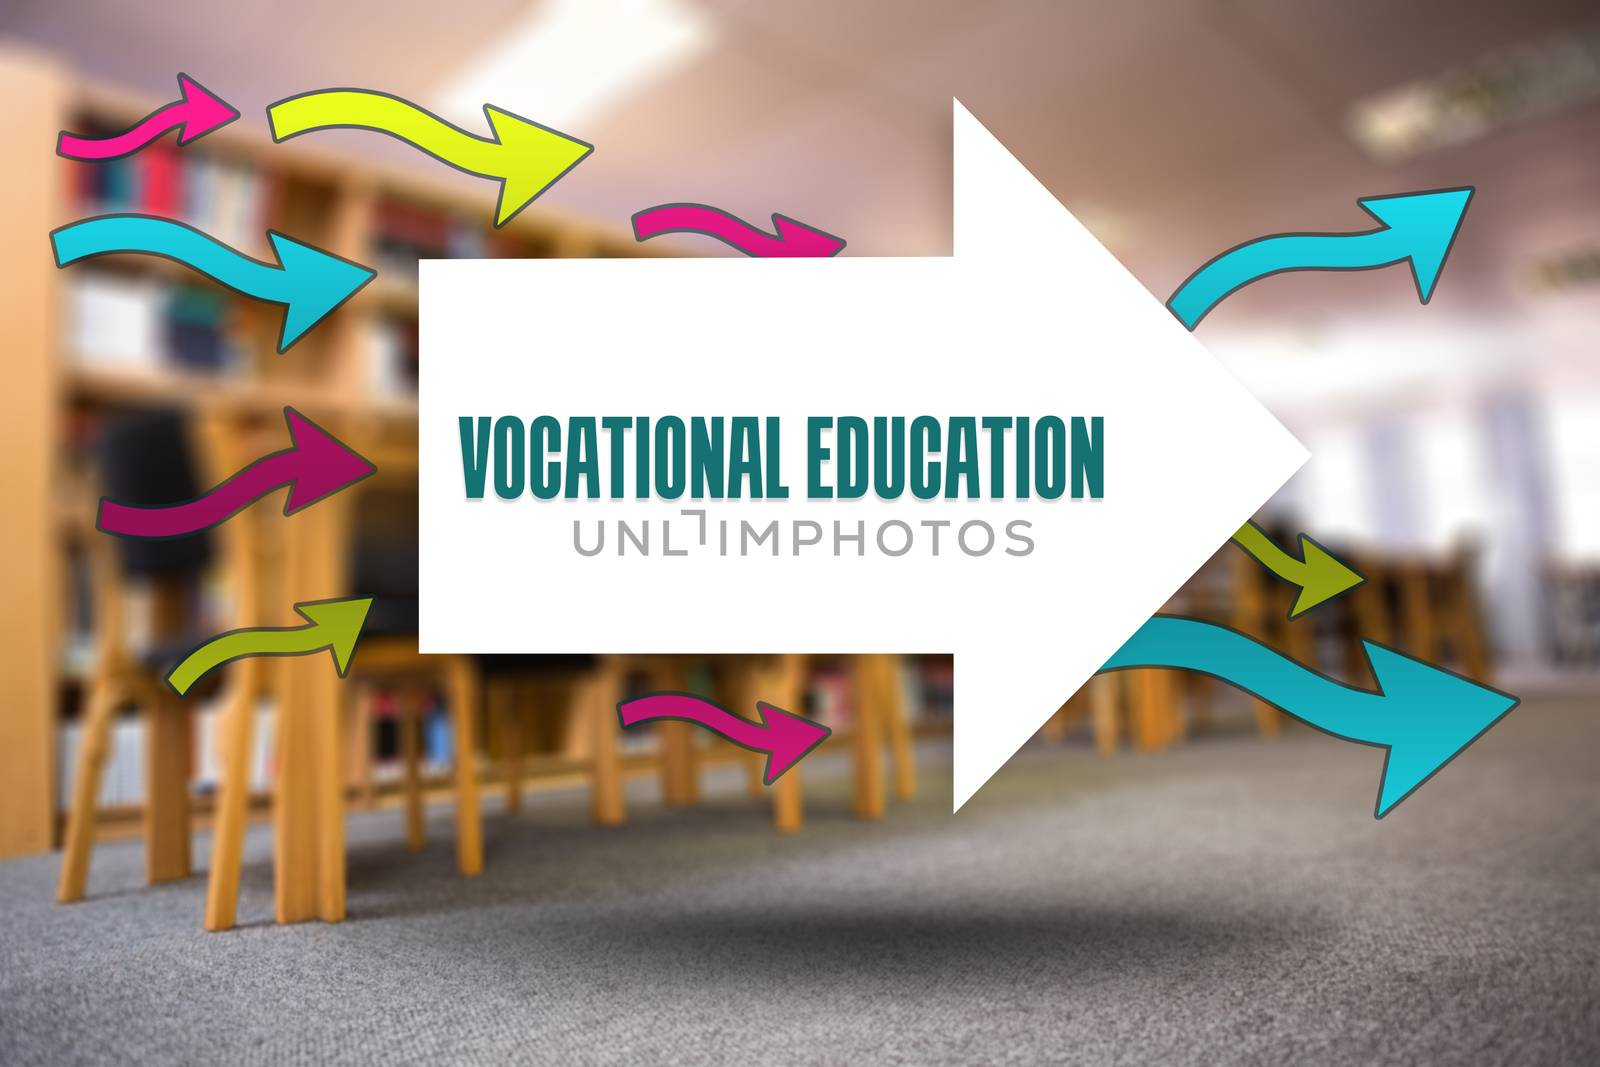 The word vocational education and arrows against volumes of books on bookshelf in library